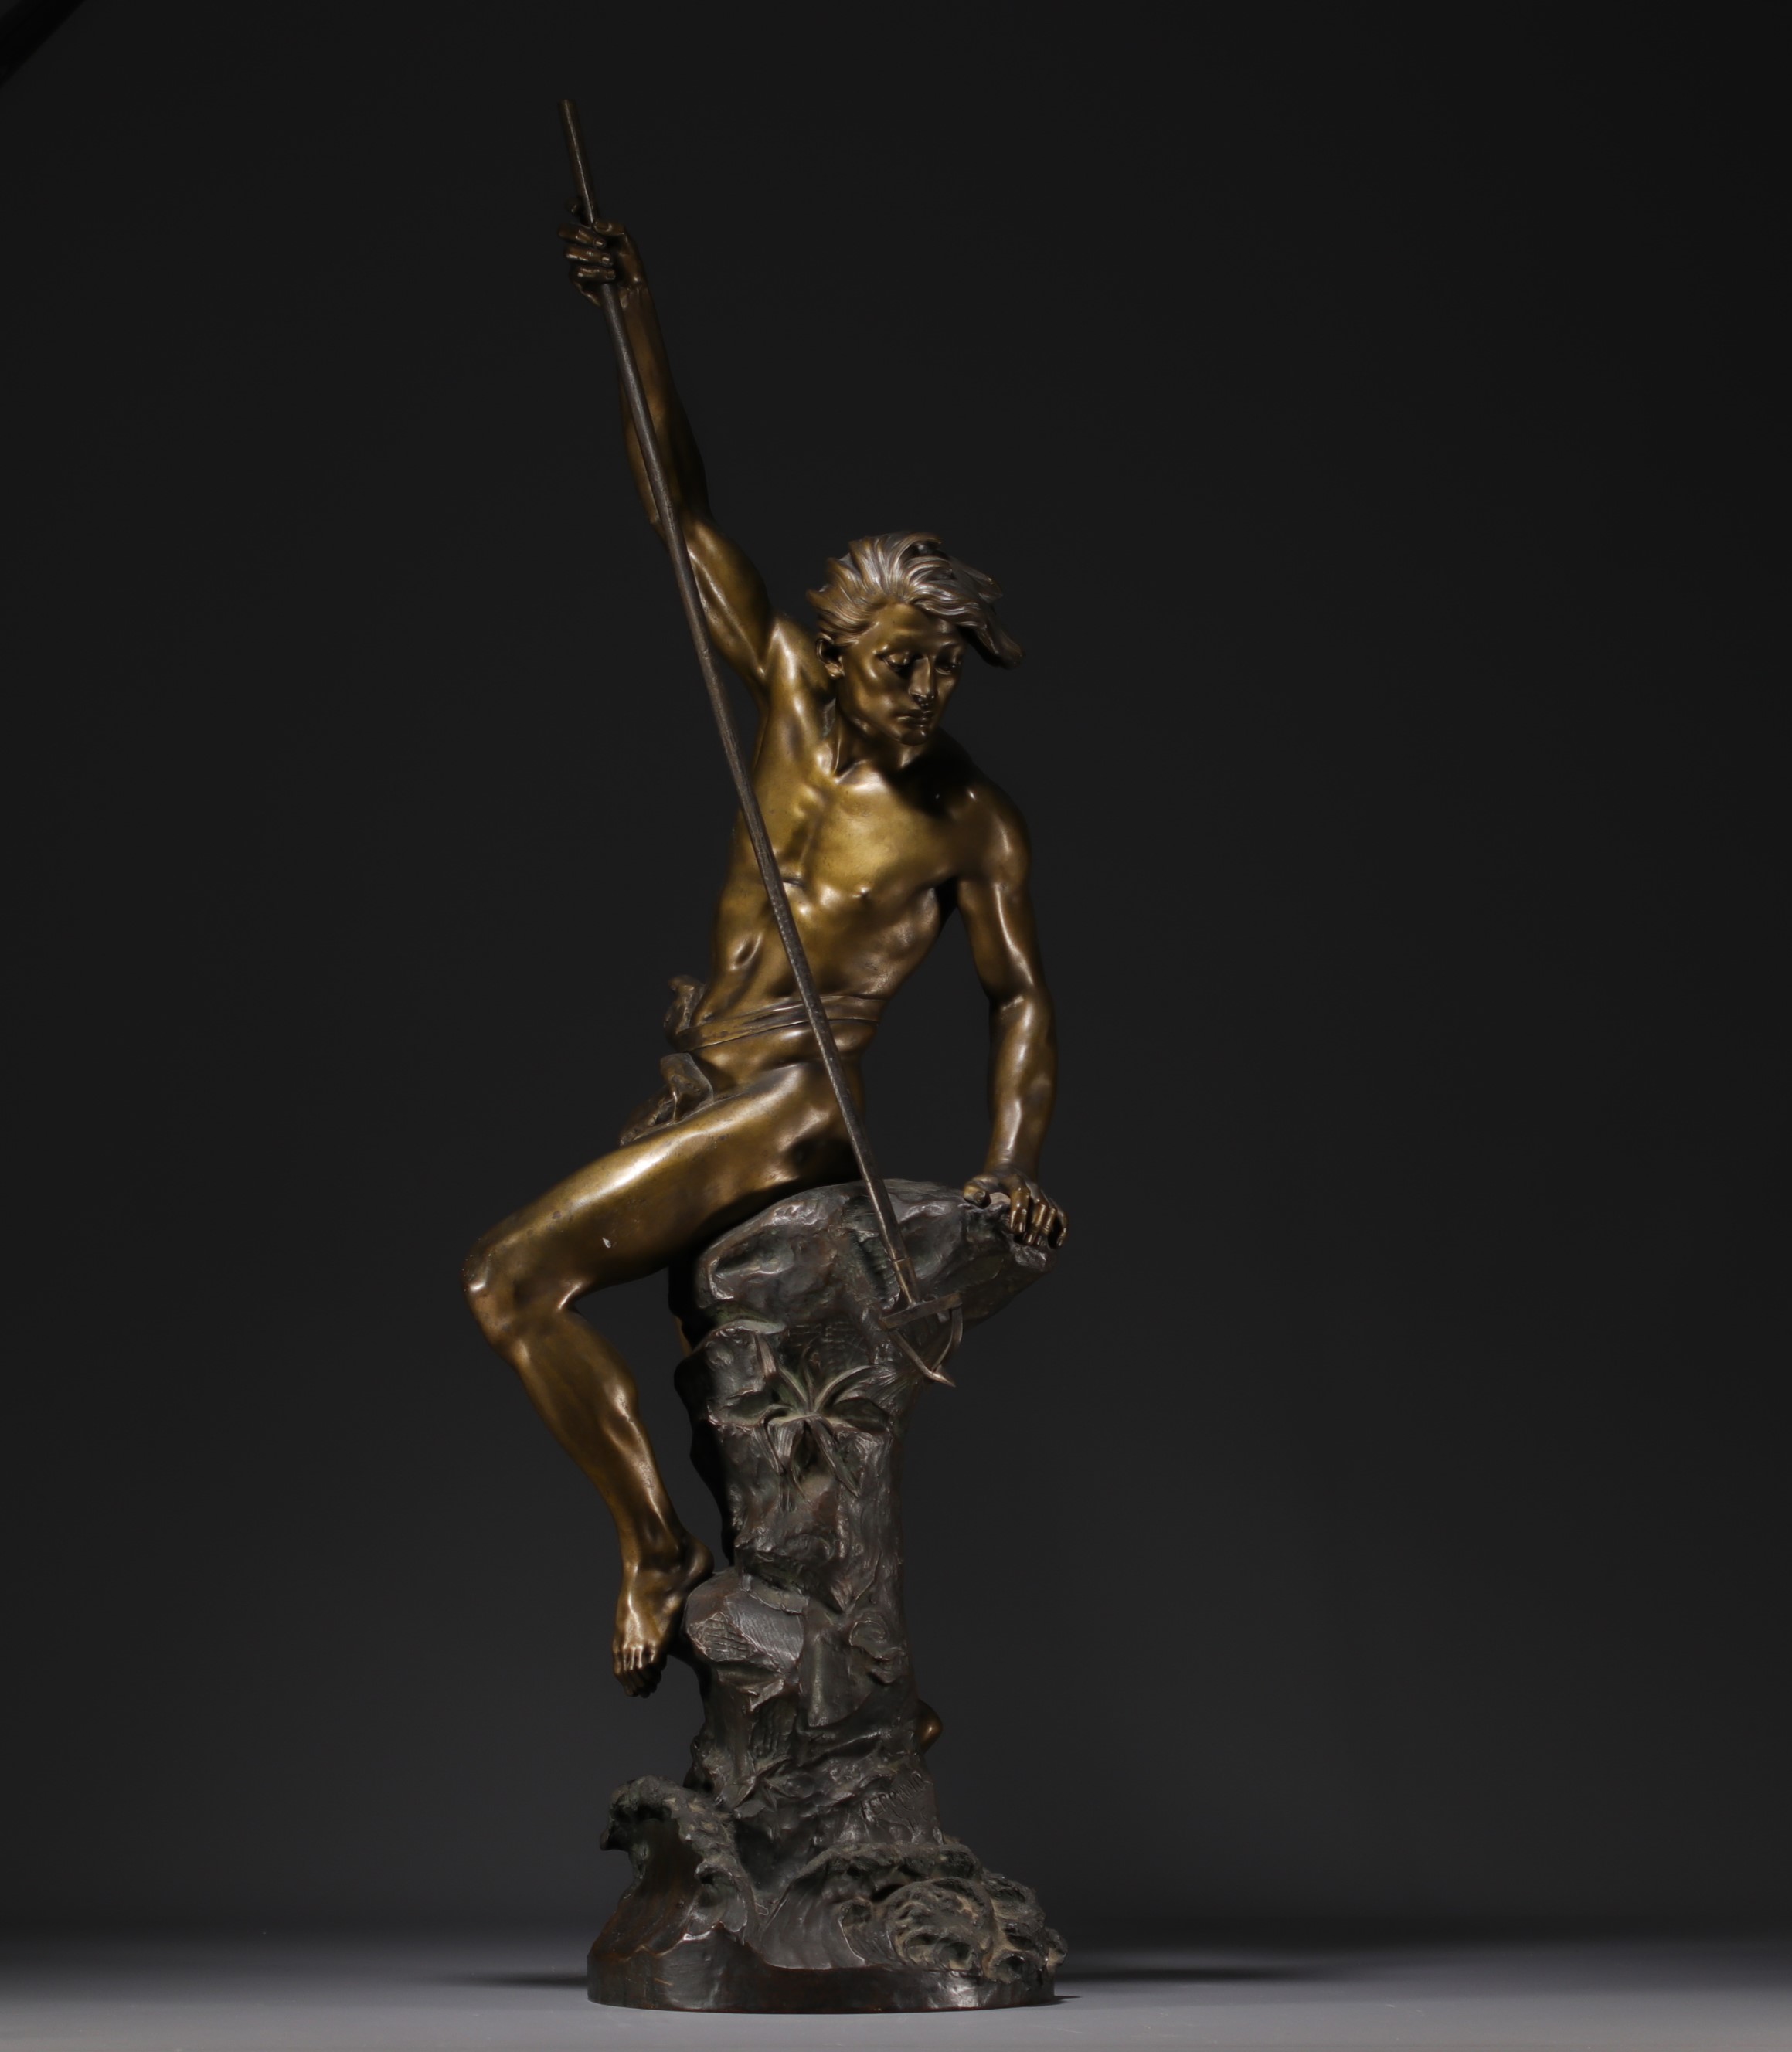 Ernest Justin FERRAND (1846-1932) "The young sinner" Sculpture in chased and patinated bronze.